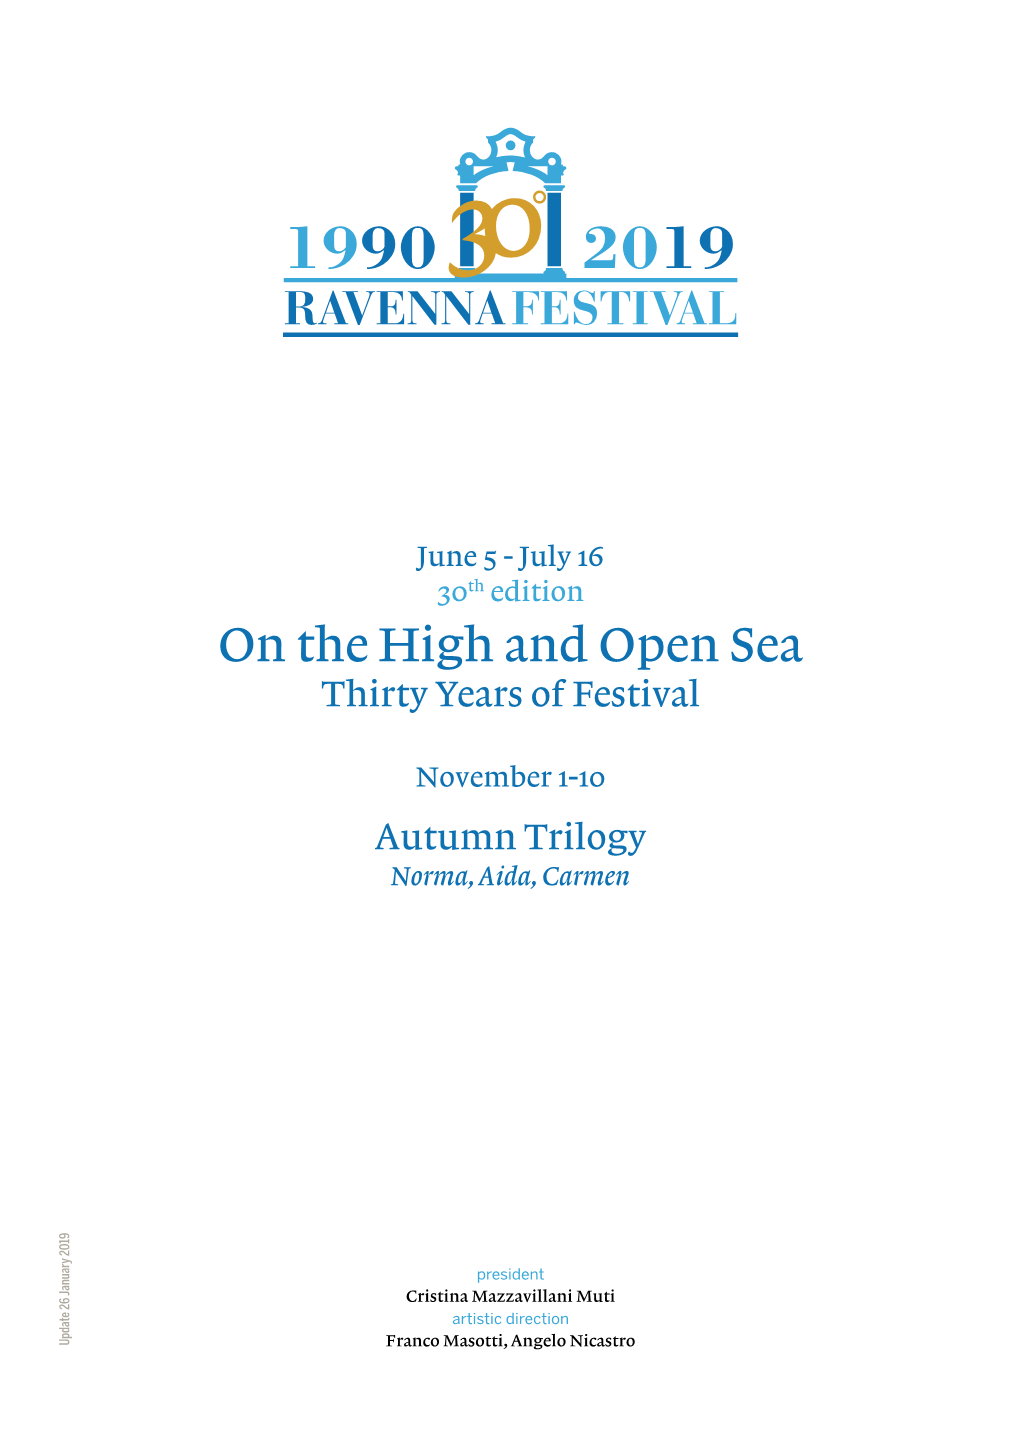 On the High and Open Sea Thirty Years of Festival